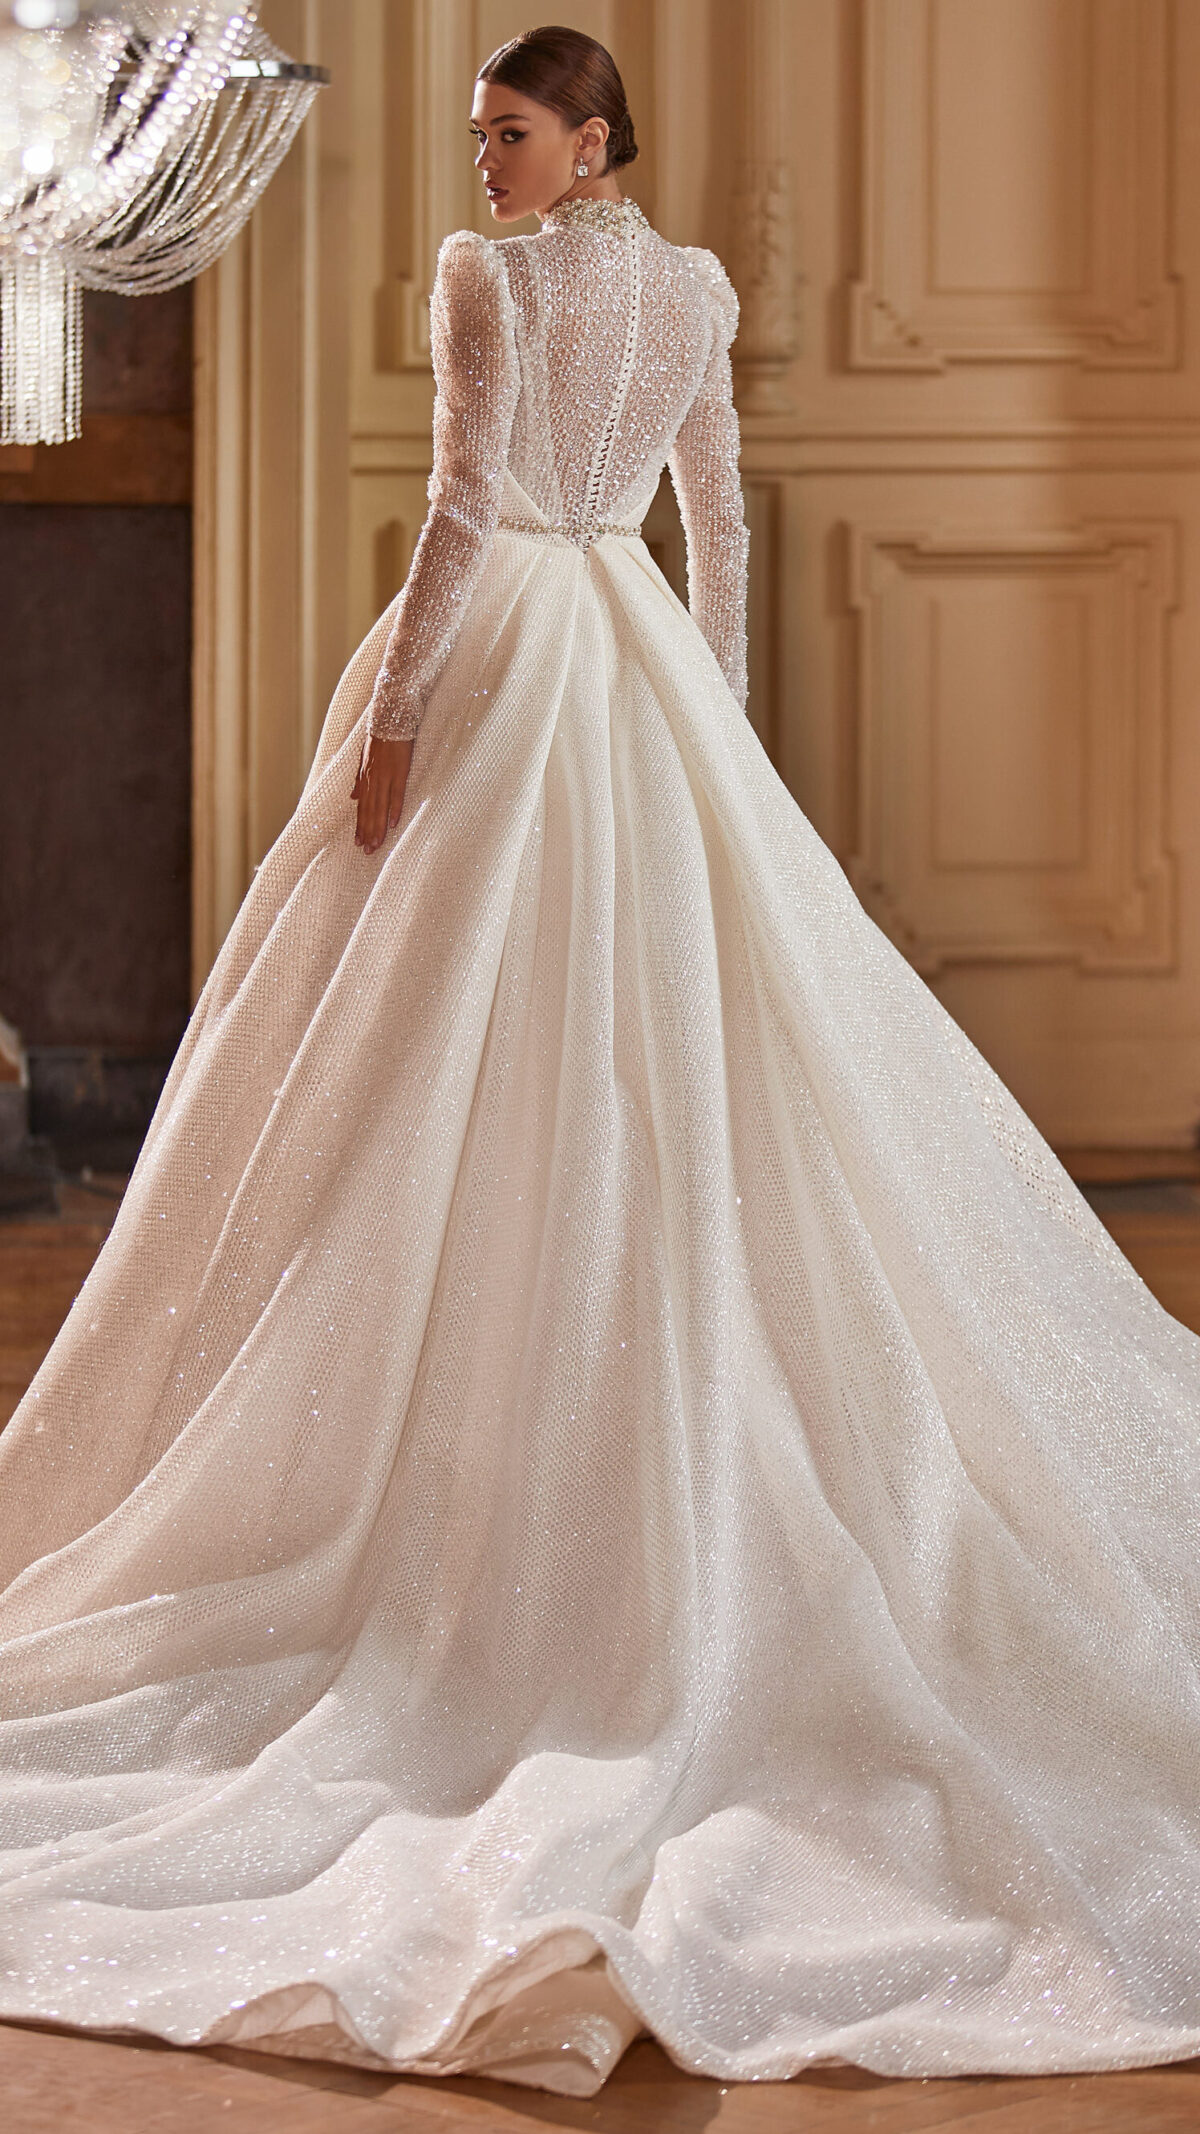 From Romantic Wedding Dresses to Fashion-Forward Evening Gowns